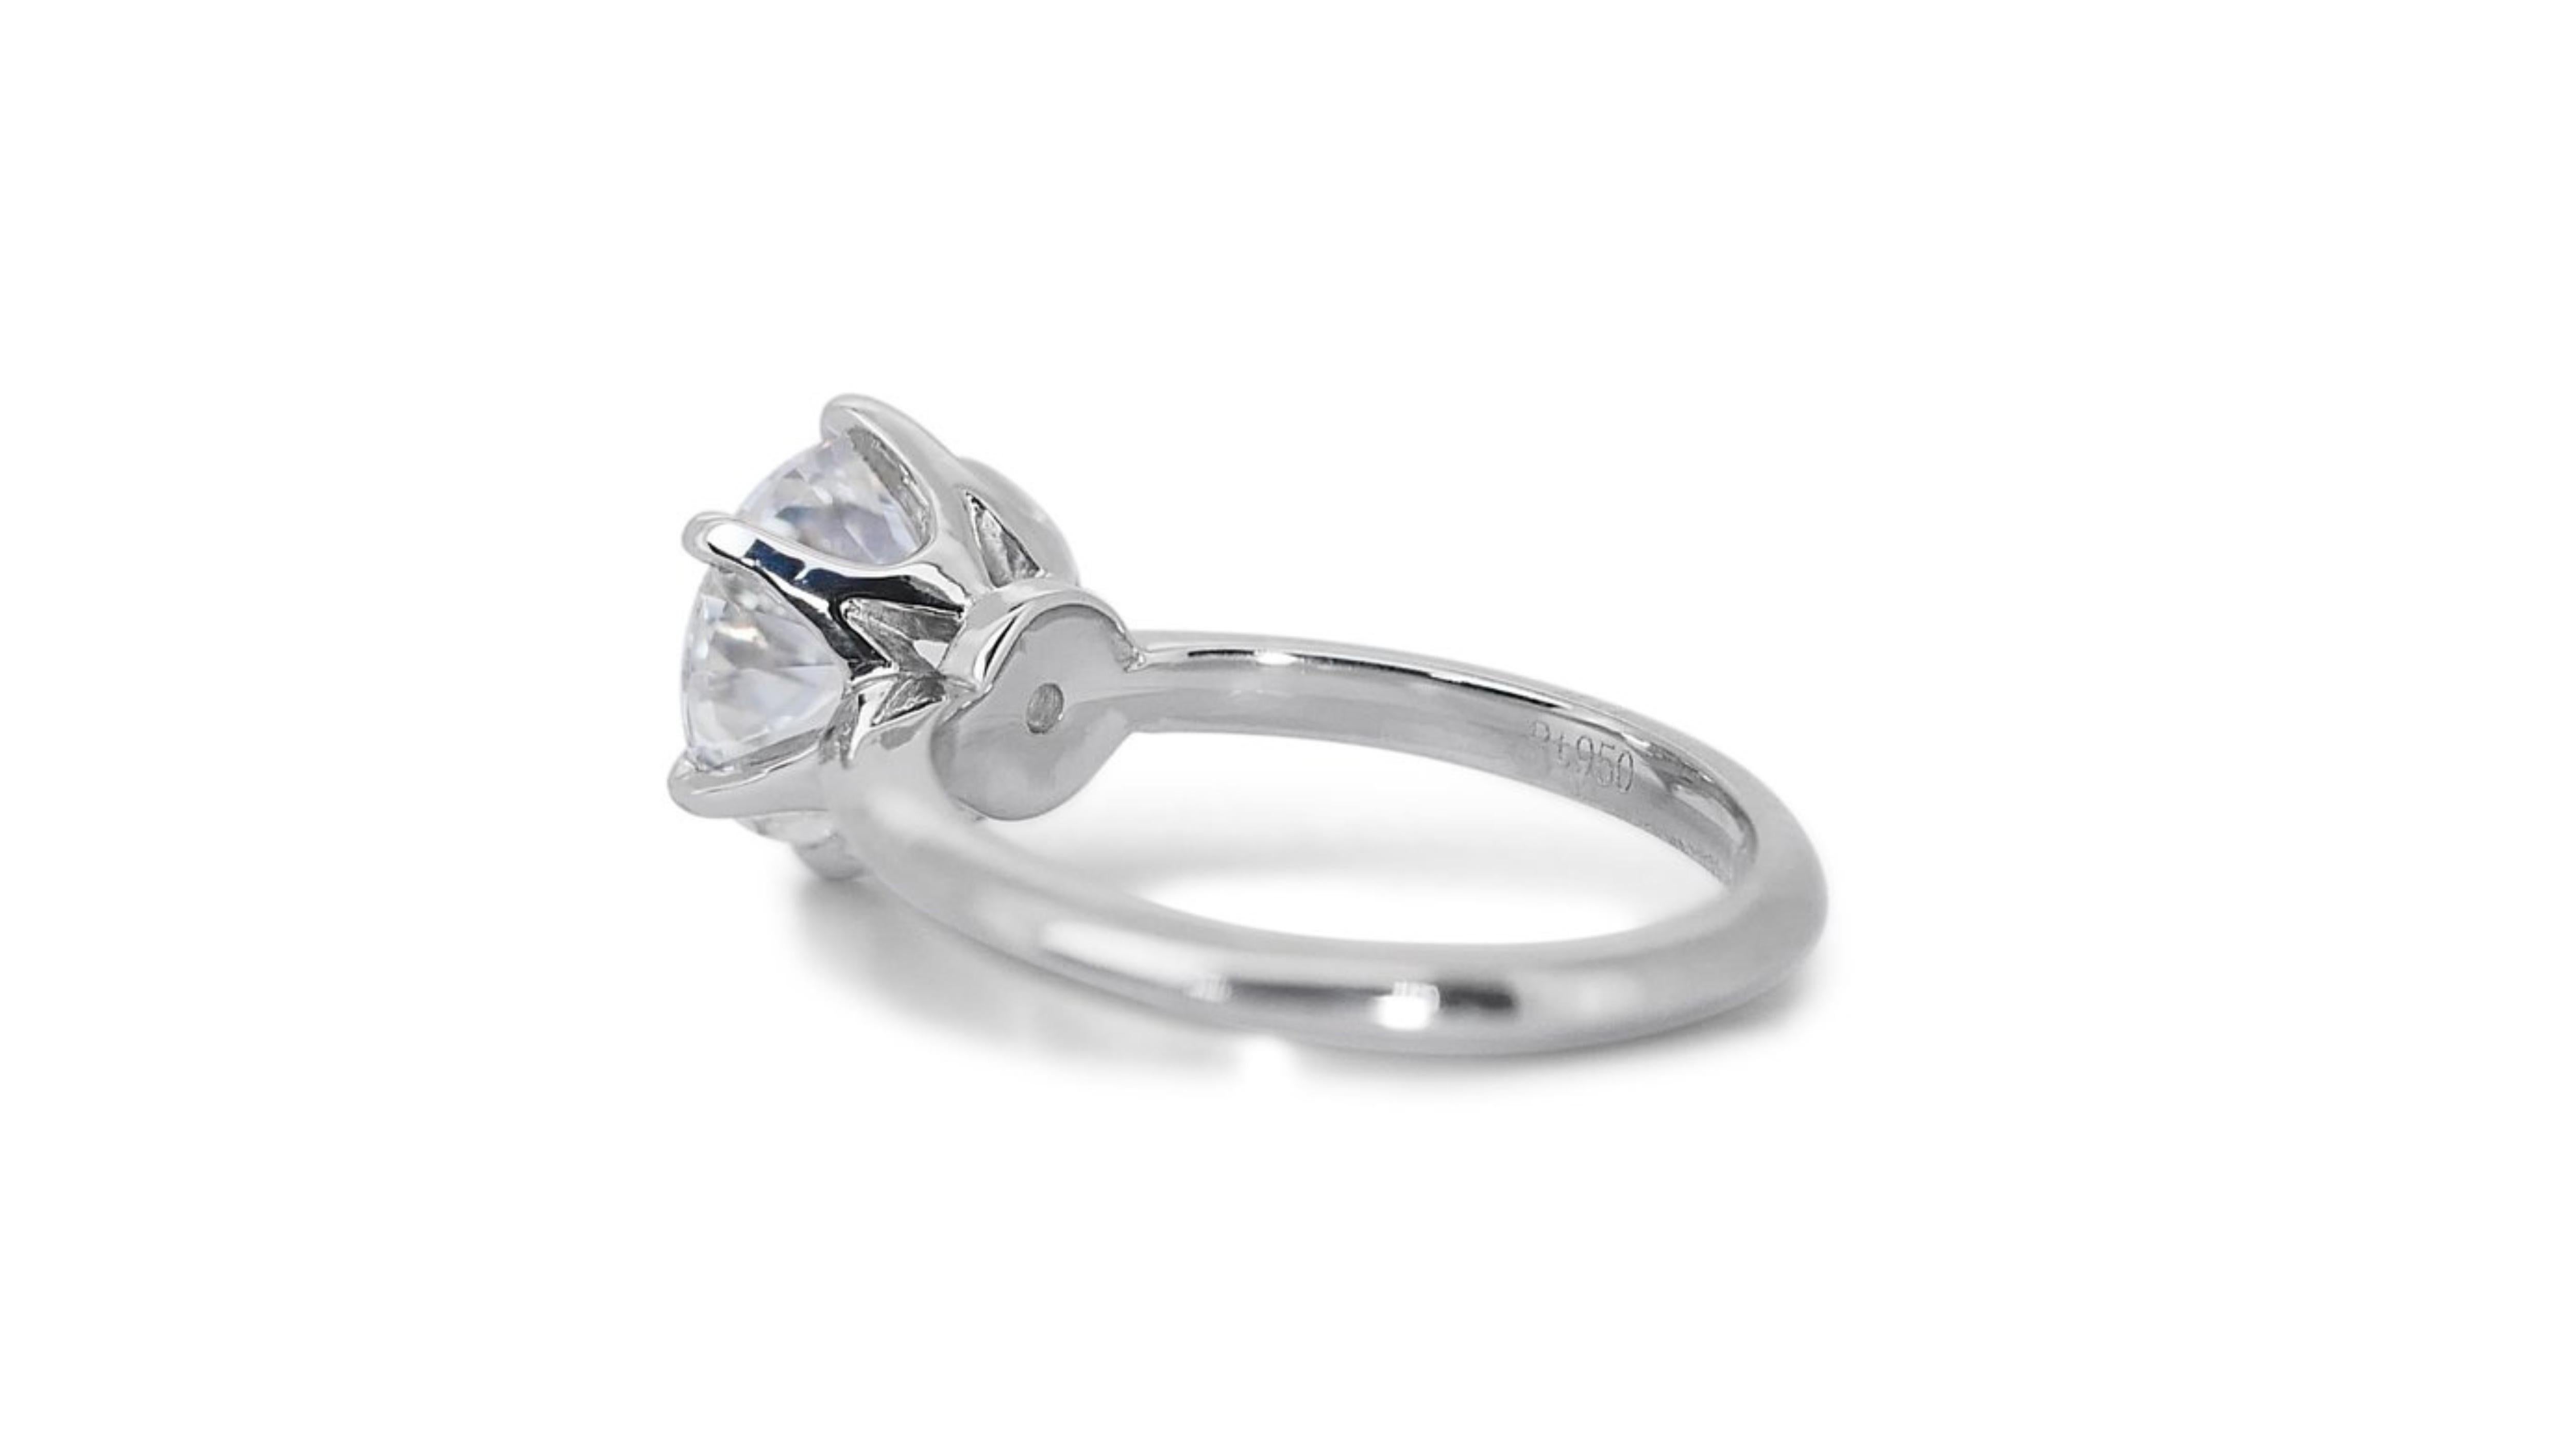 Round Cut Stunning 18k White Gold Ring with 2.4 carat Natural Diamond For Sale